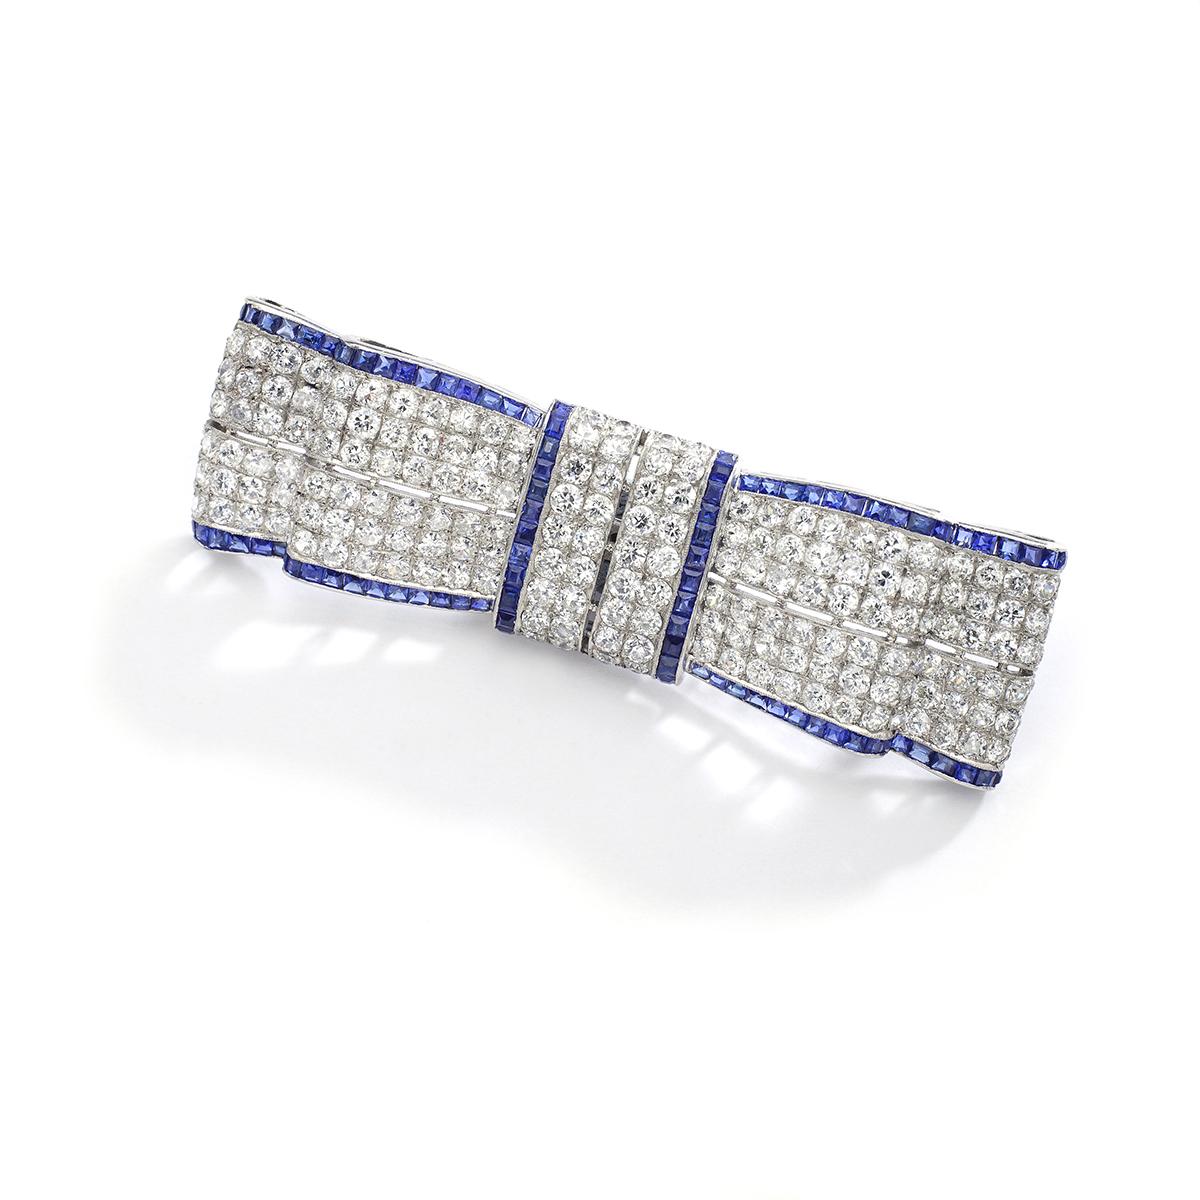 Former property of an English Gentleman.
Elegant and Stunning as usual Art Deco design is one of our favorite period.
Bow tie brooch in diamond and calibrated sapphires. Circa 1930.
French mark for platinum.

Dimensions:
Length: 6.5 centimeters (2.6